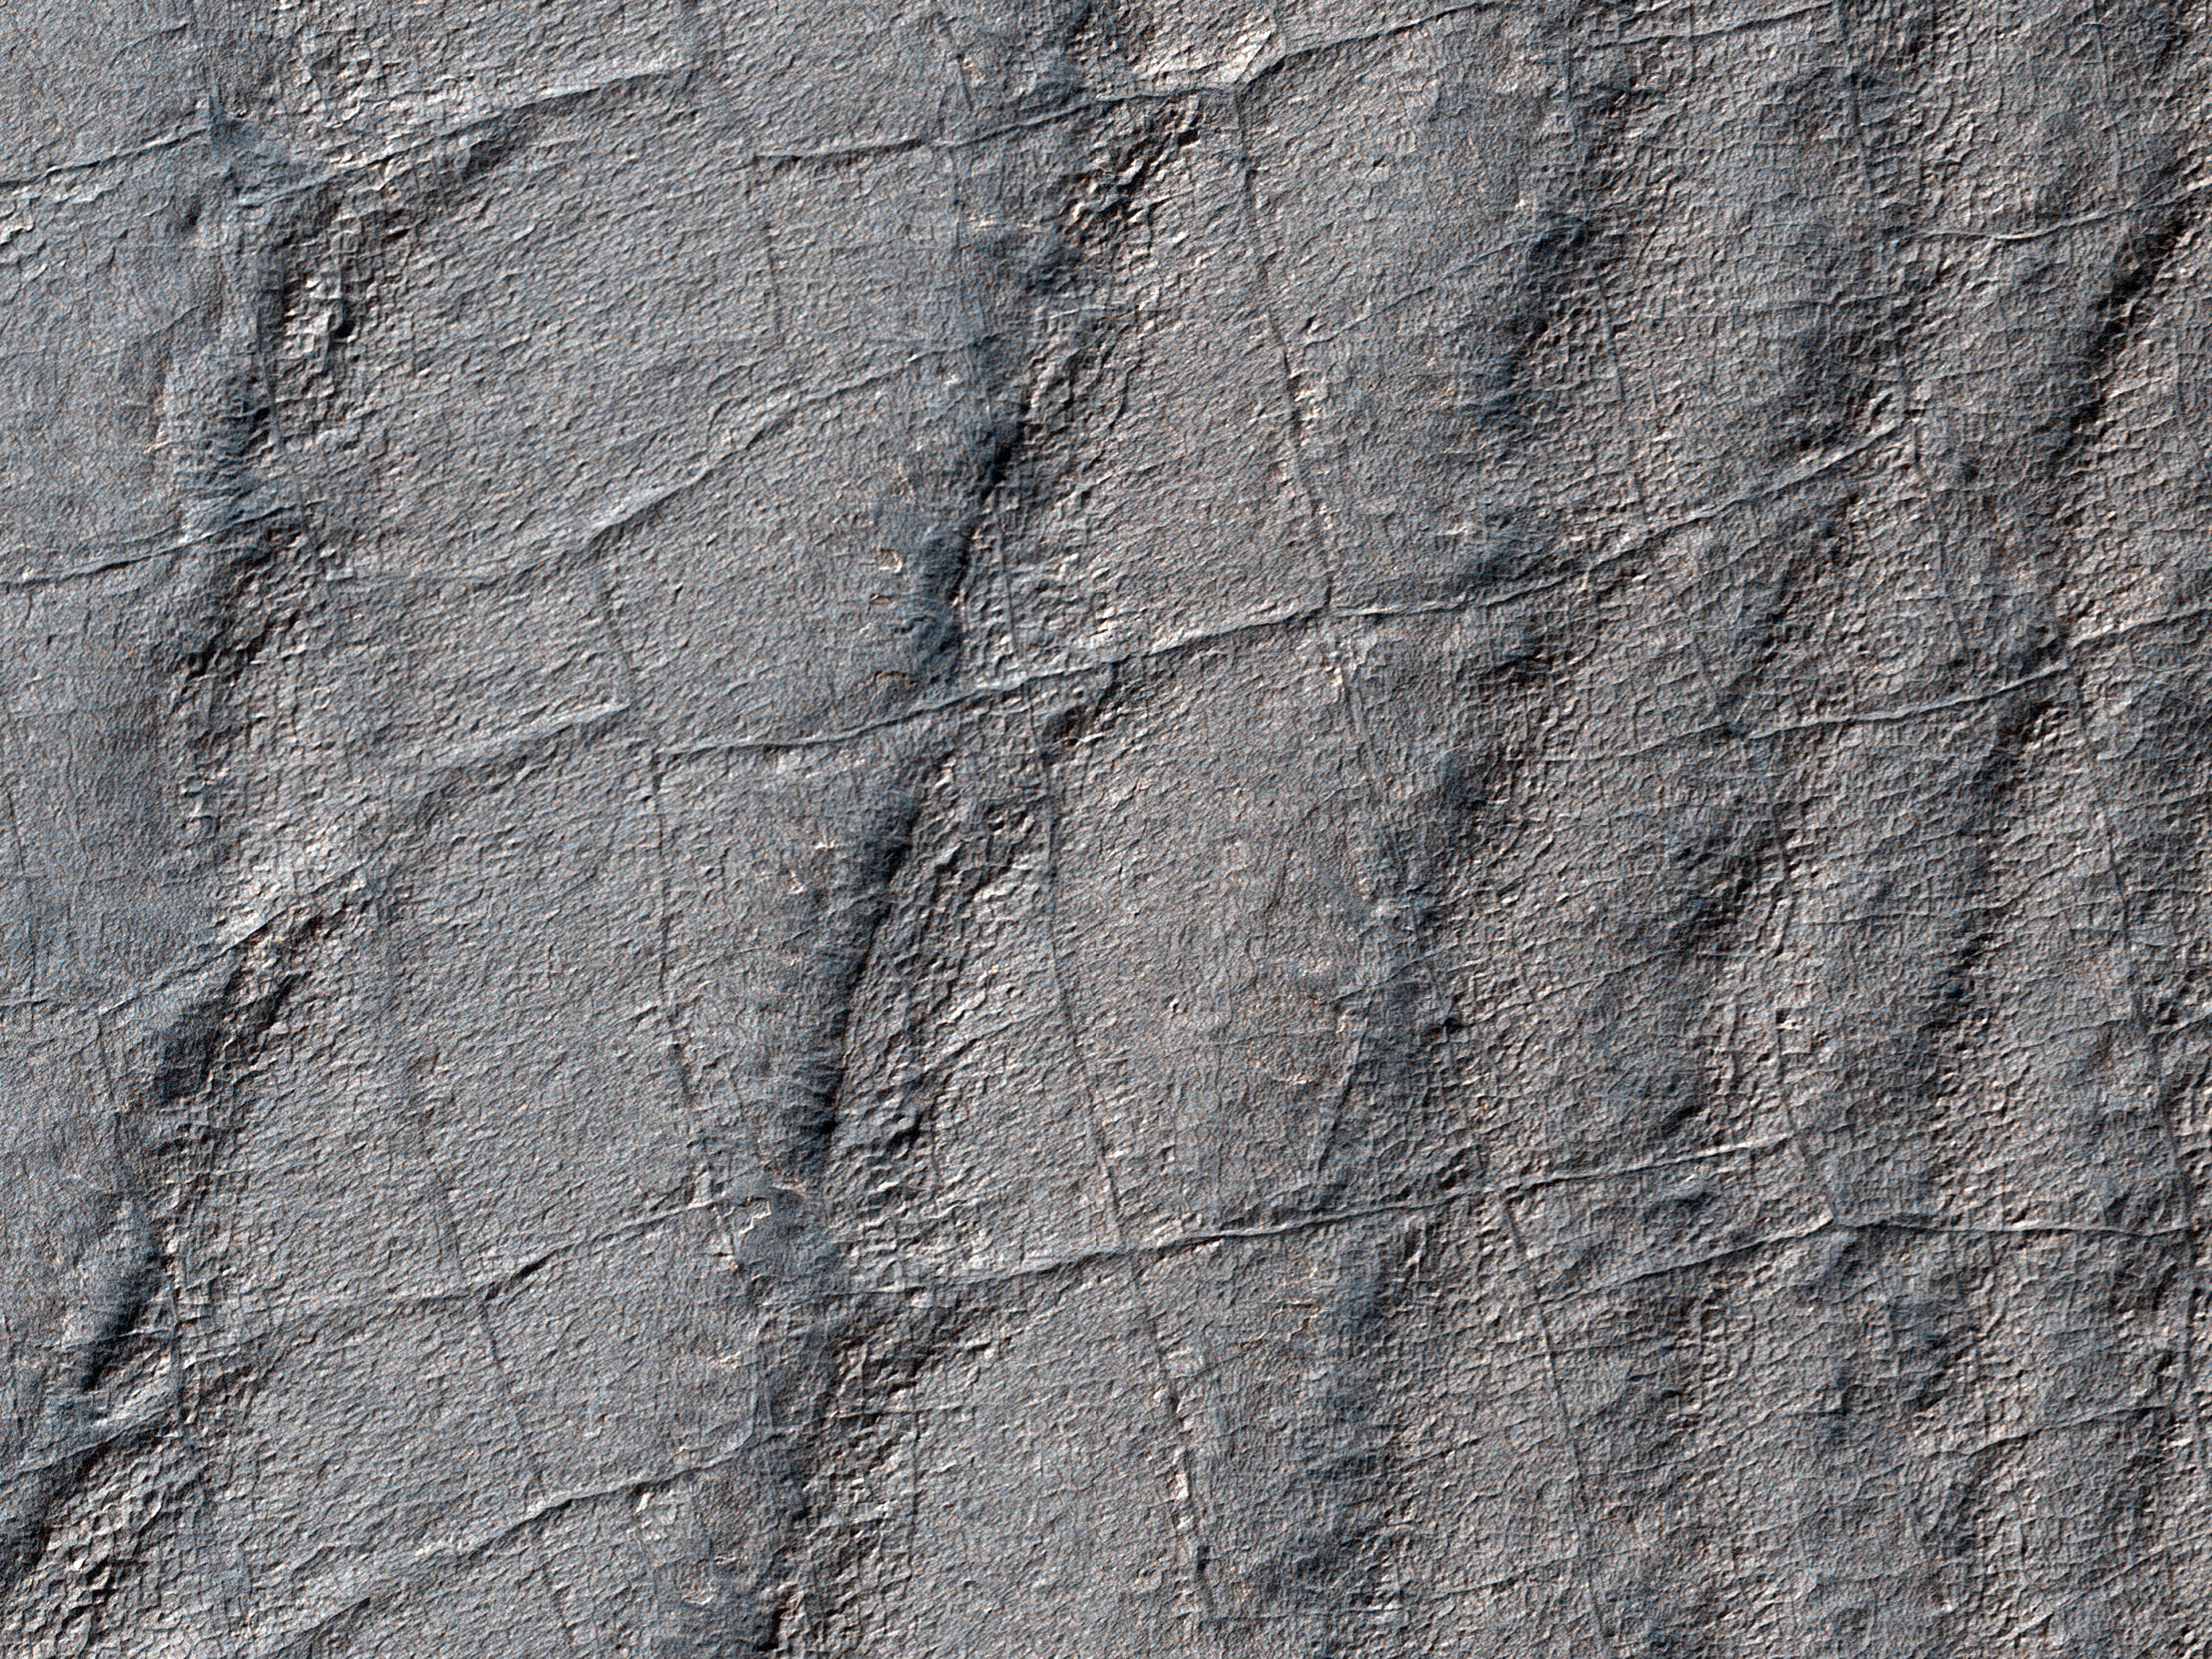 Polygonal Fracturing of the South Polar Layered Deposits